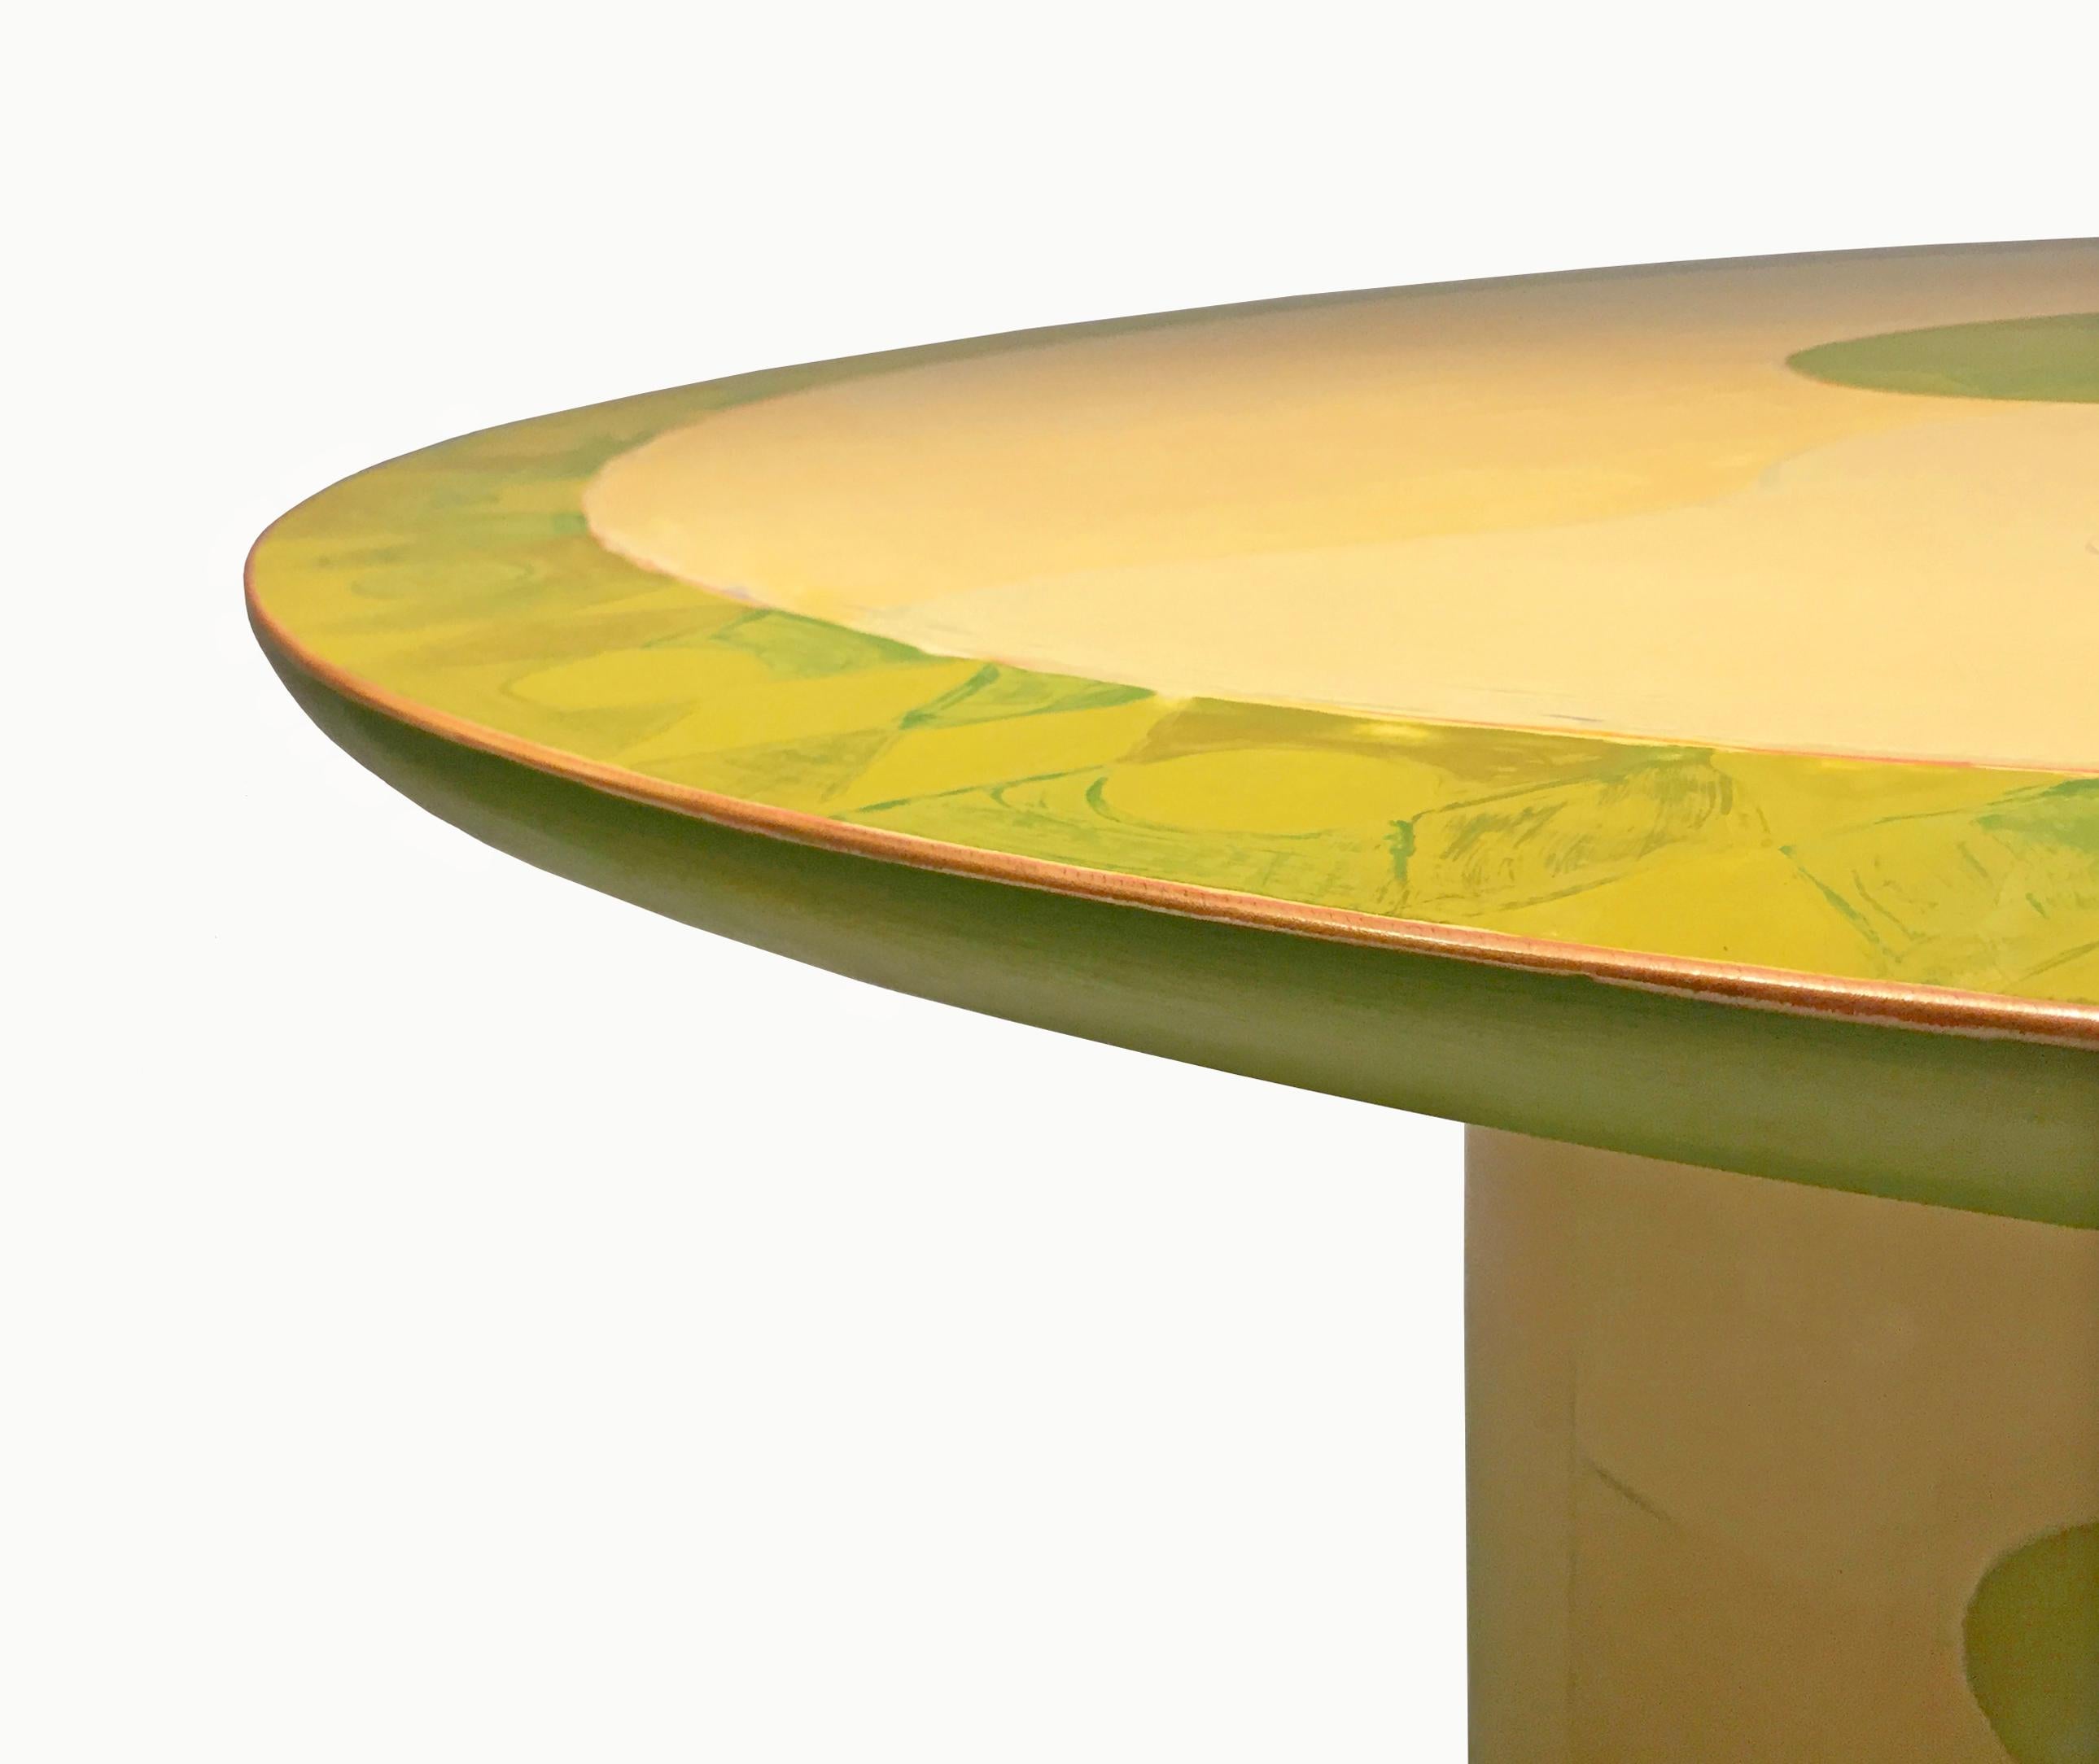 A unique, commissioned wooden dining centre table by artist and designer Randy Shull with a round, beveled top and a cylindrical base that has eight round plastic protective feet. The table is hand painted in approximately 50 layers, with sanding in